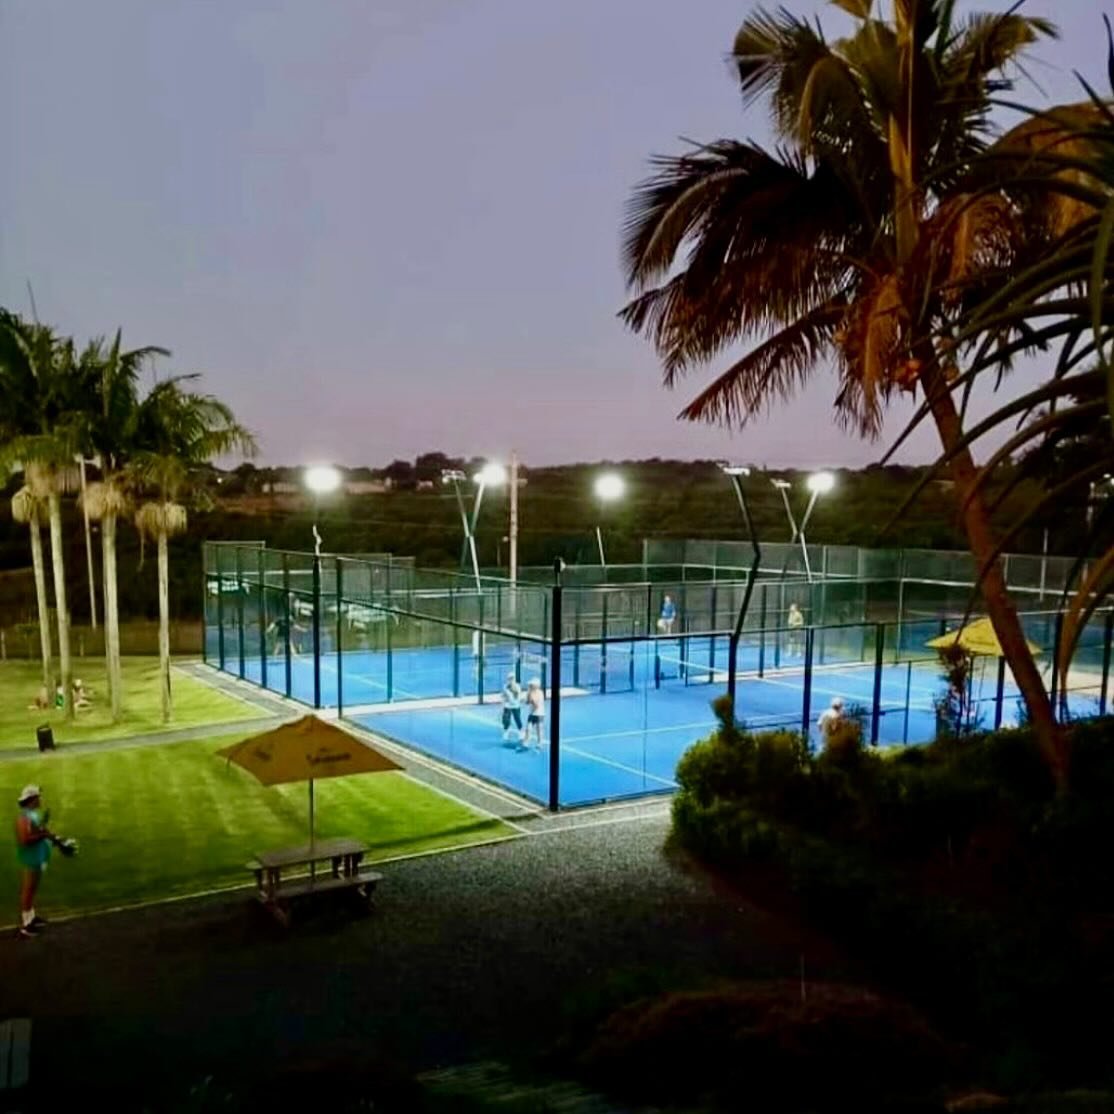 Late night rally under the stars! 🌟🎾 From beginners to pros, everyone&rsquo;s welcome to join the fun on these glowing Padel courts. The game doesn&rsquo;t stop when the sun goes down&mdash;it just gets more exciting! Grab your padel and meet us he